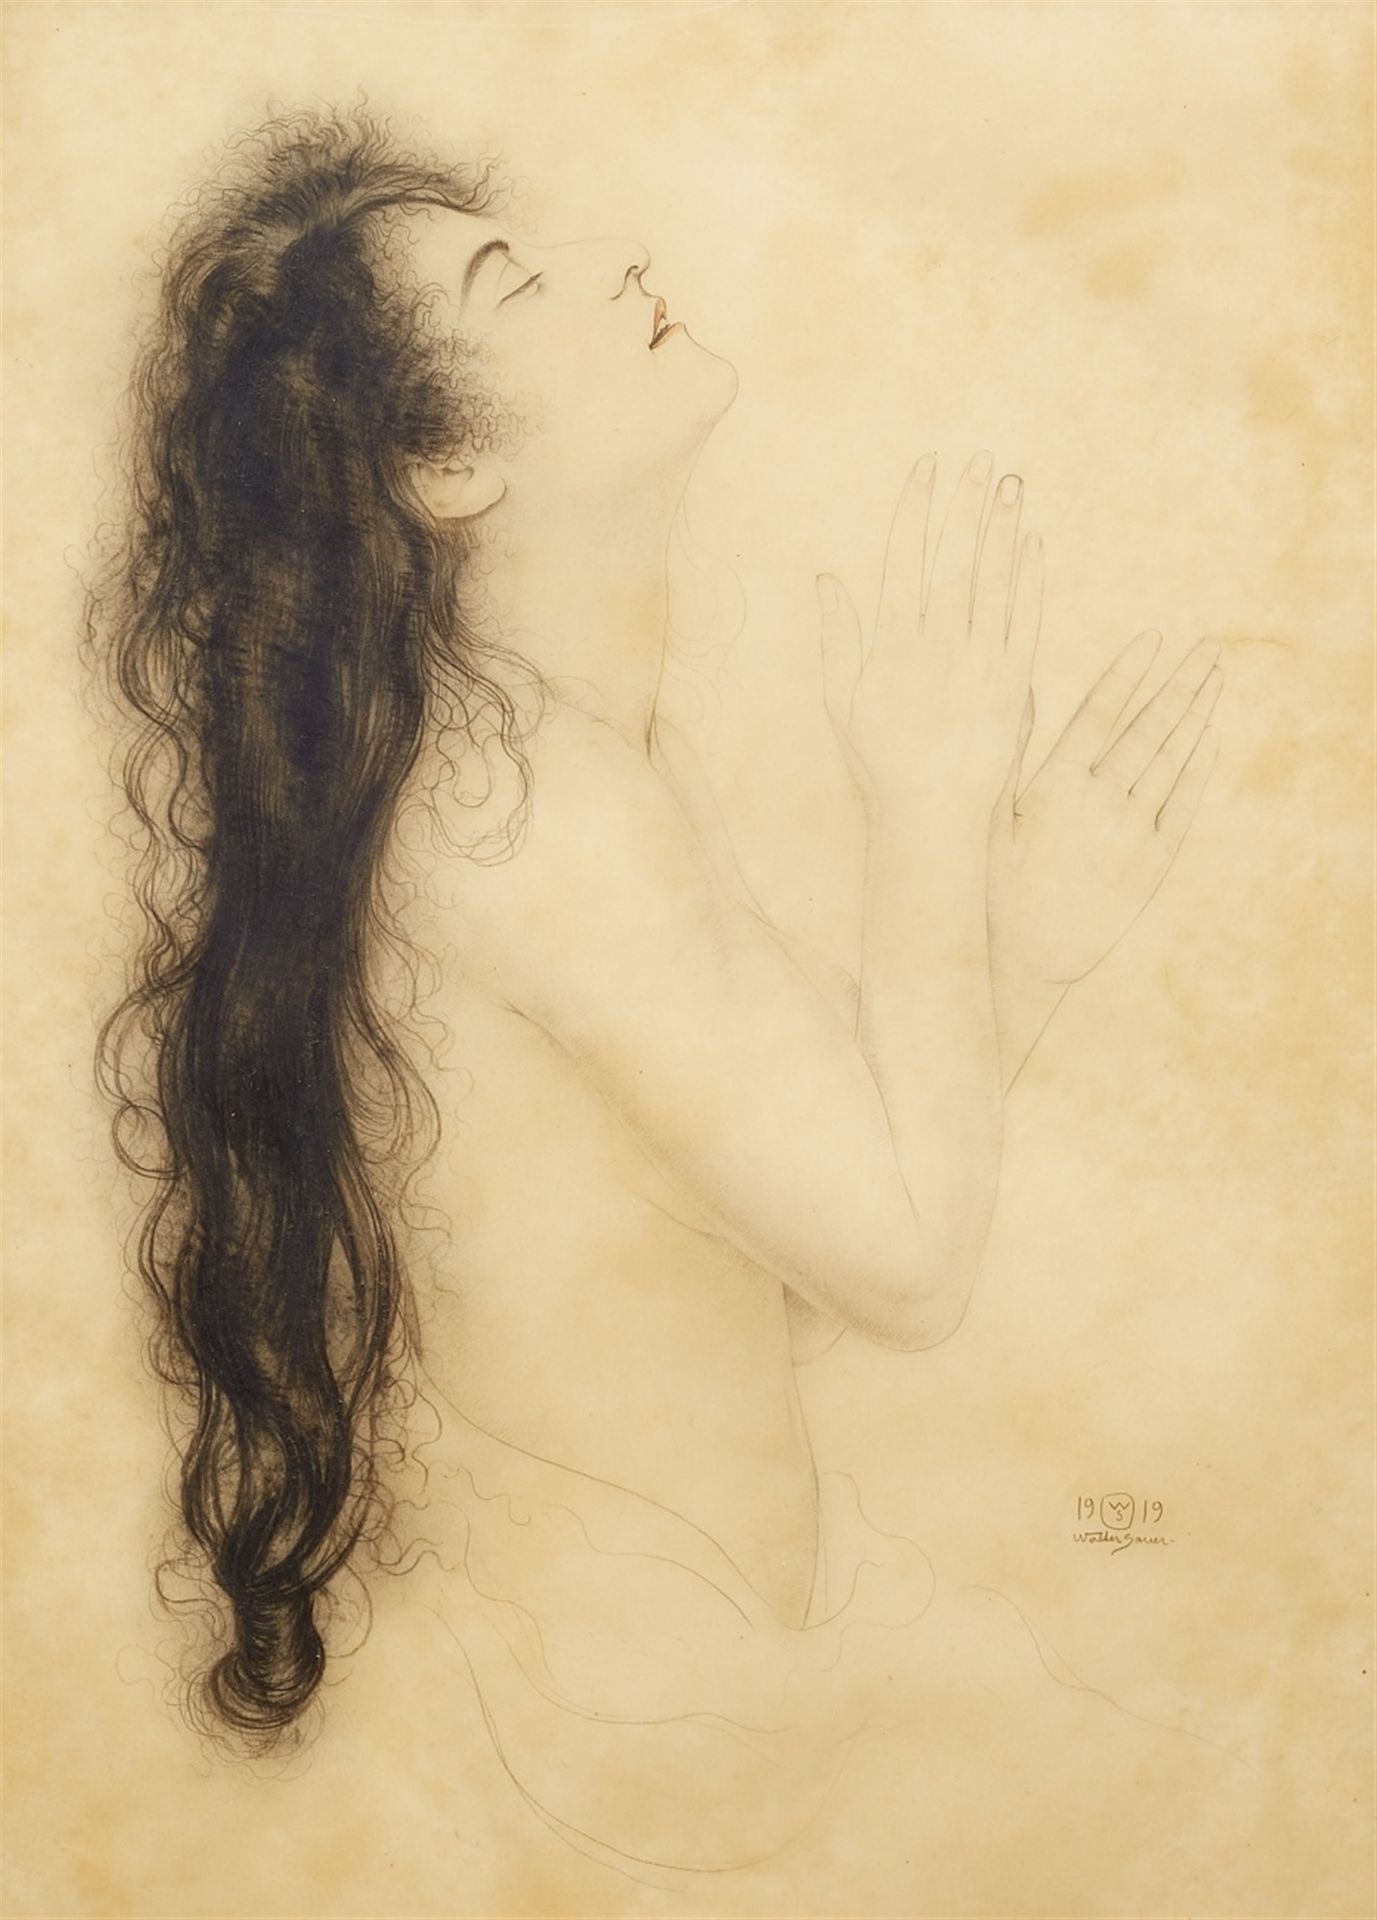 Walter Sauer, Portrait of a Woman with Long Hair